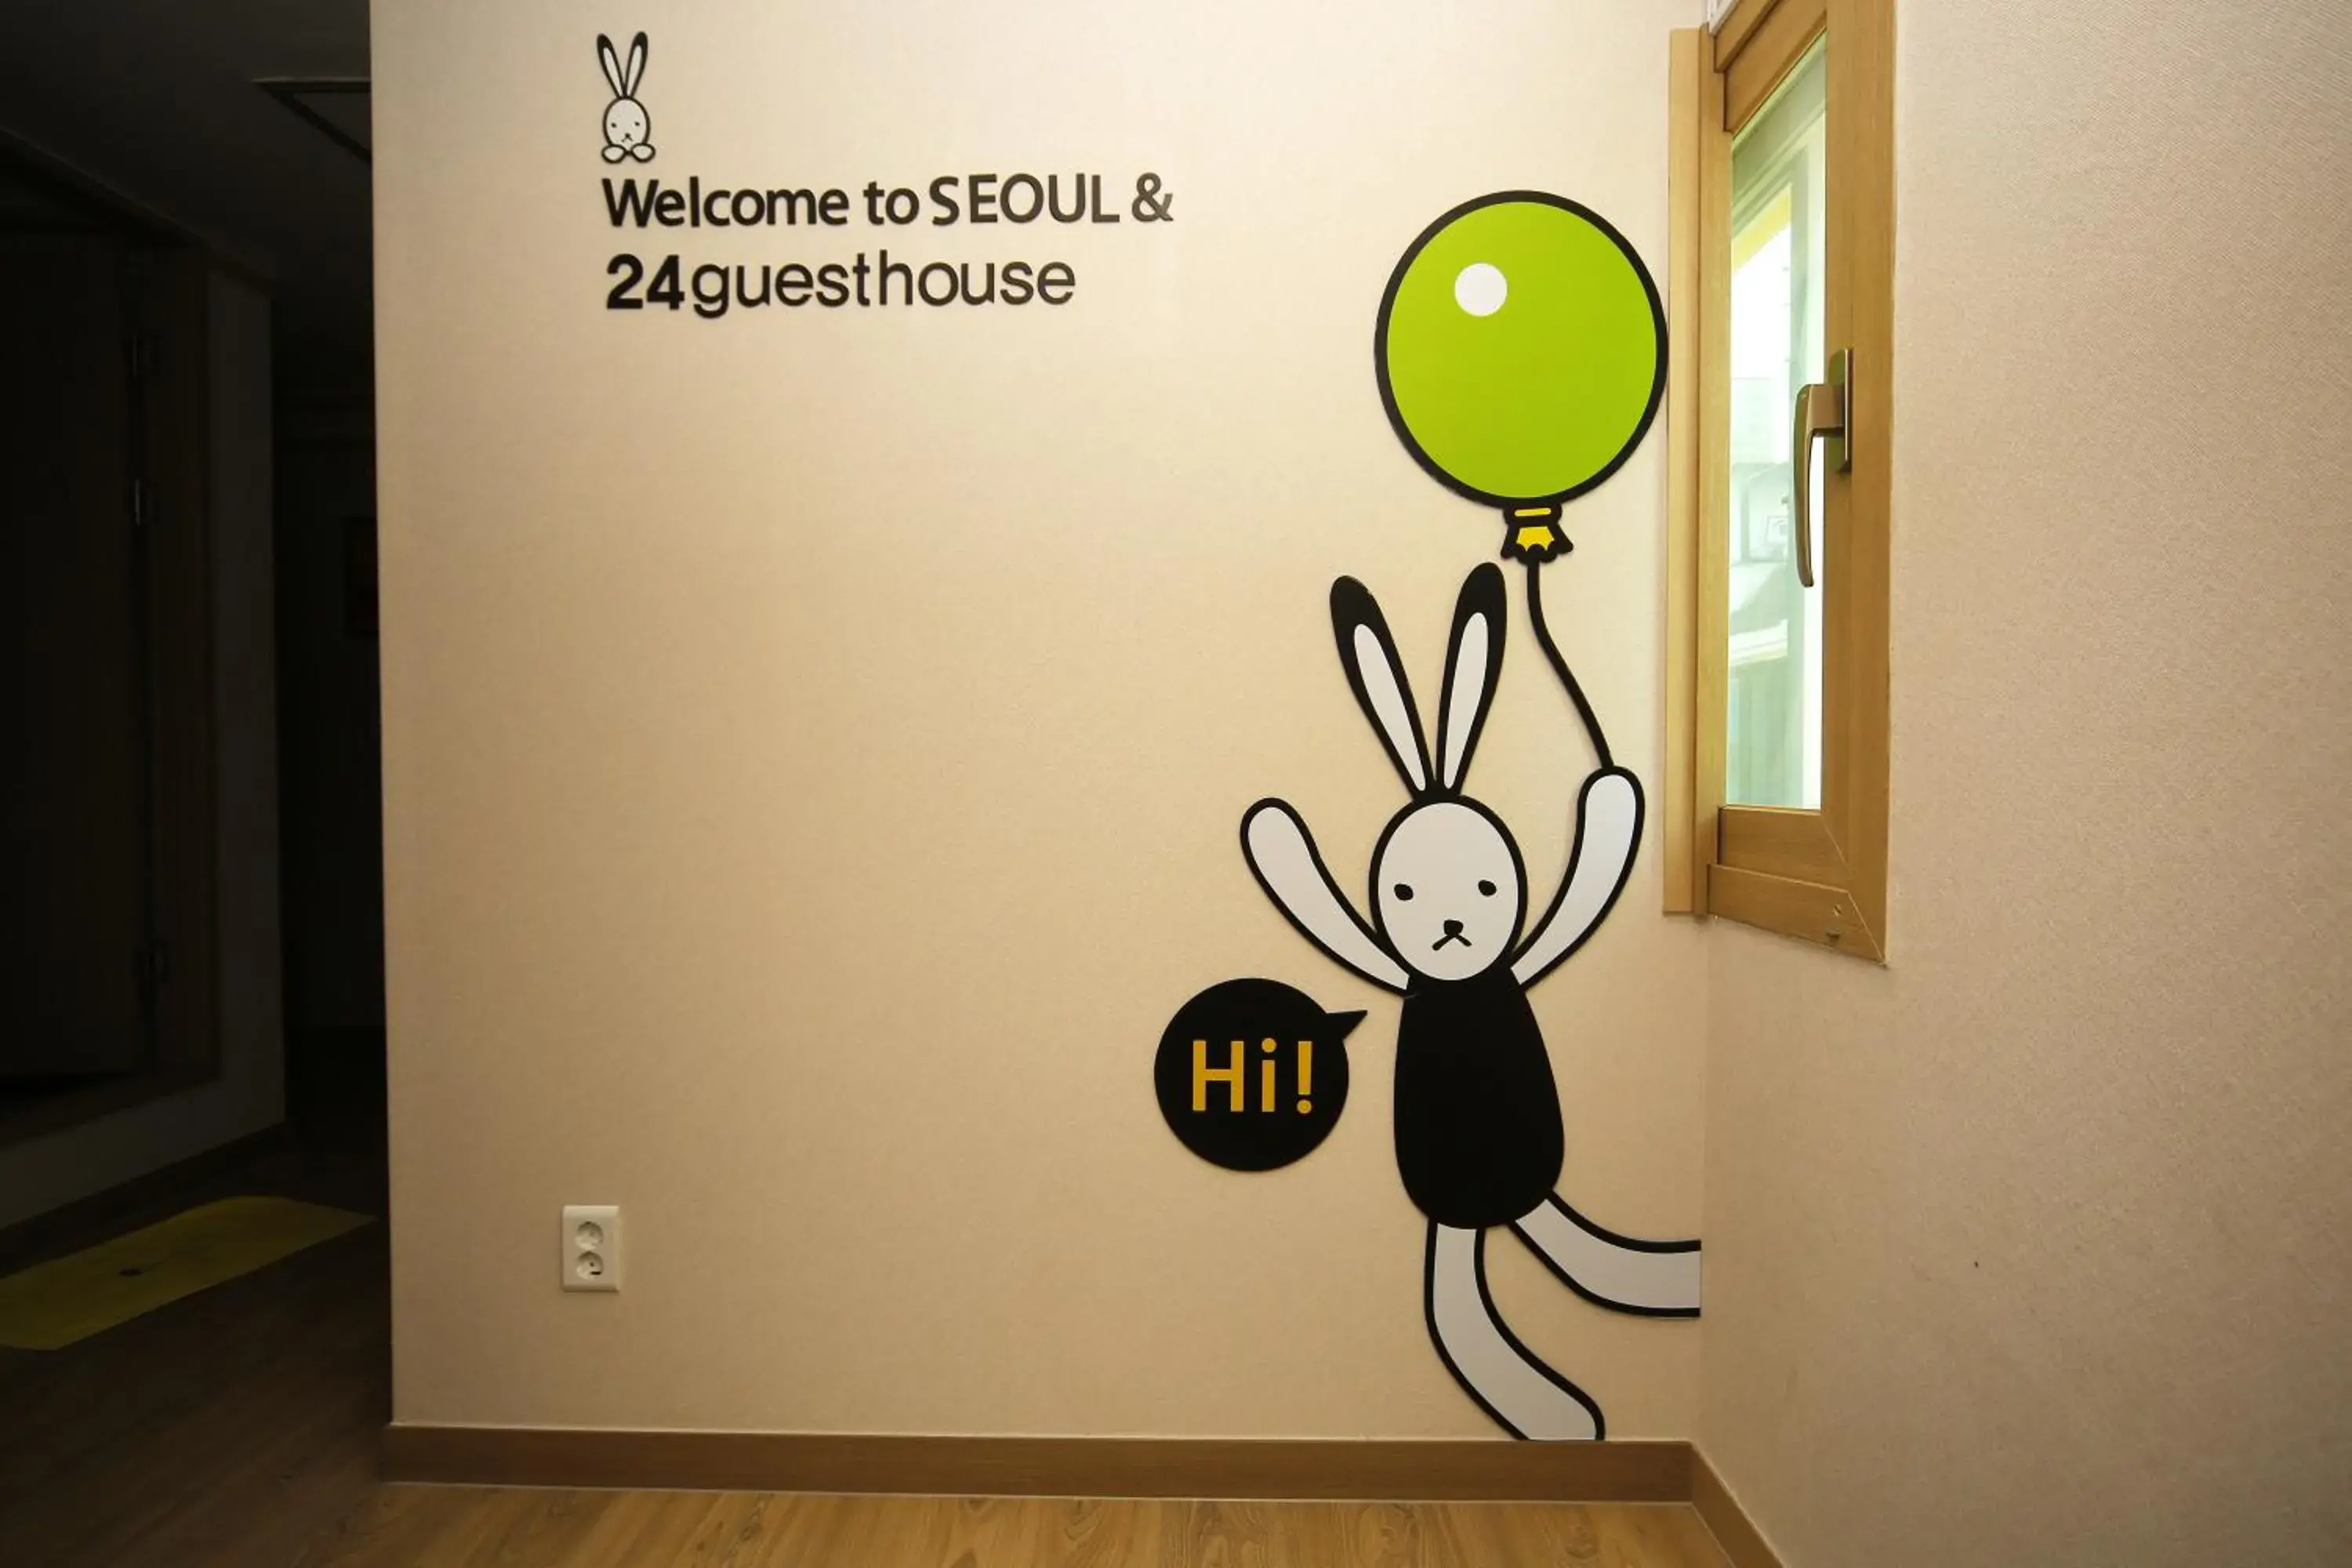 Area and facilities in 24 Guesthouse KyungHee University